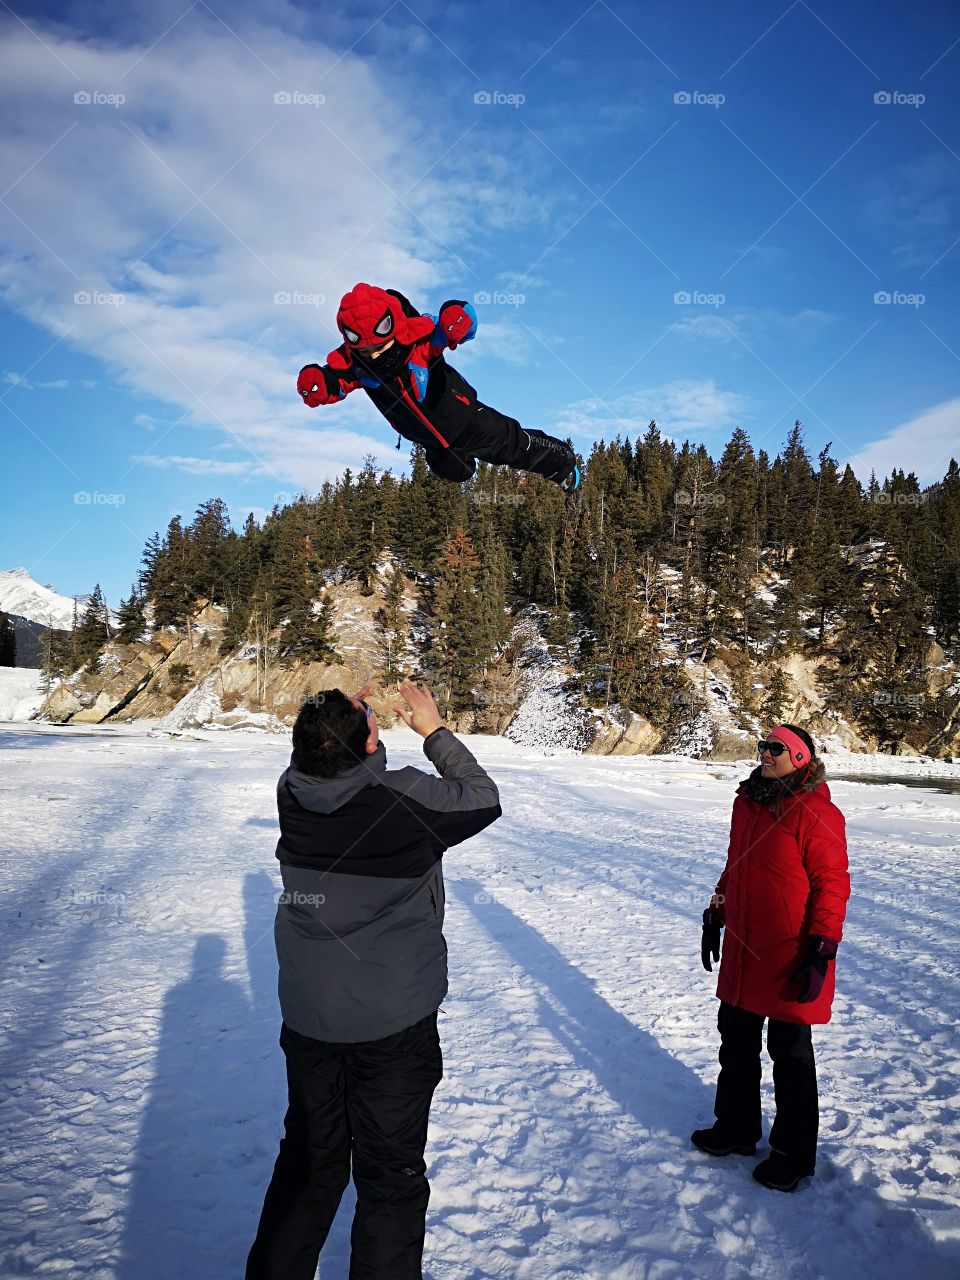 little spiderman from Mexico enjoying his first experience of Canadian winter here in Banff National park